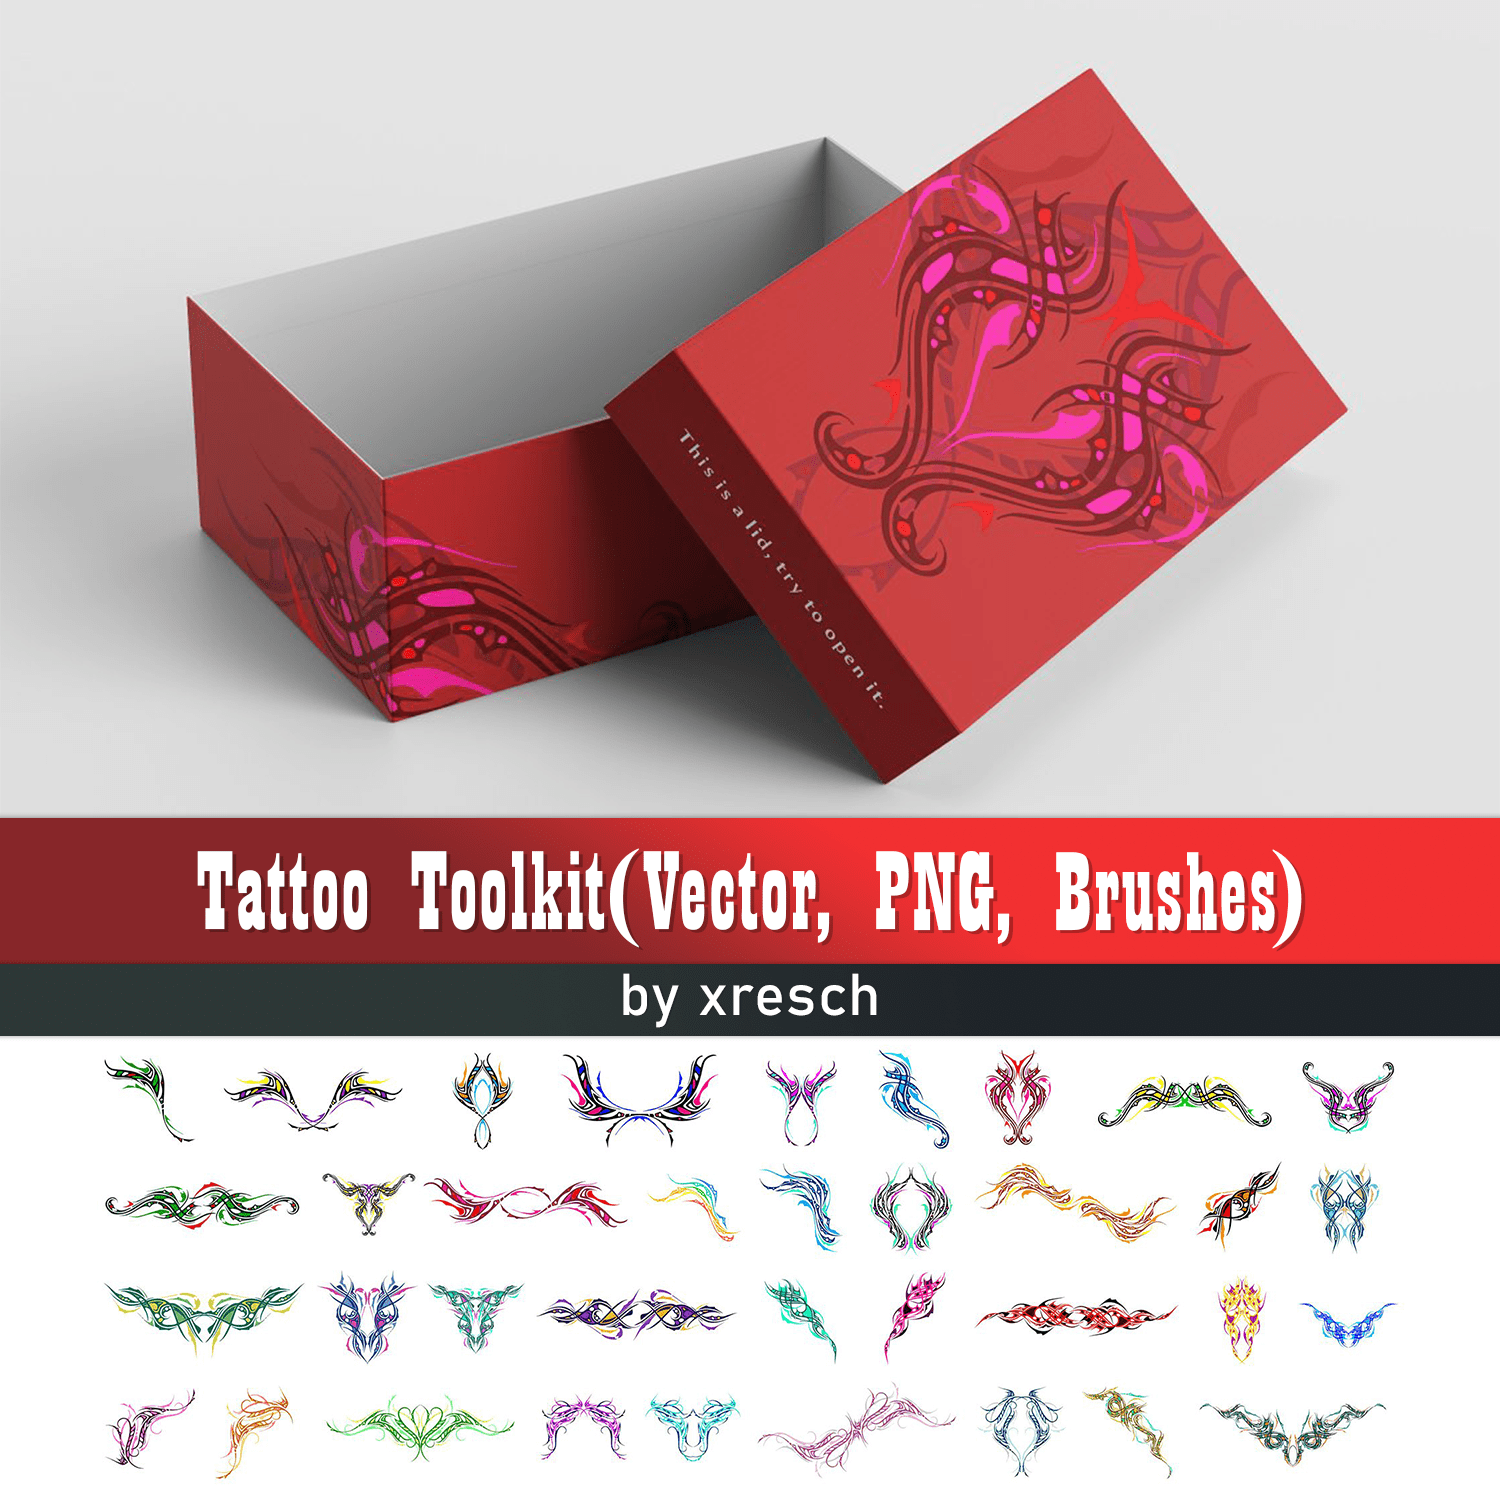 Tattoo Toolkit(Vector, PNG, Brushes) Cover.